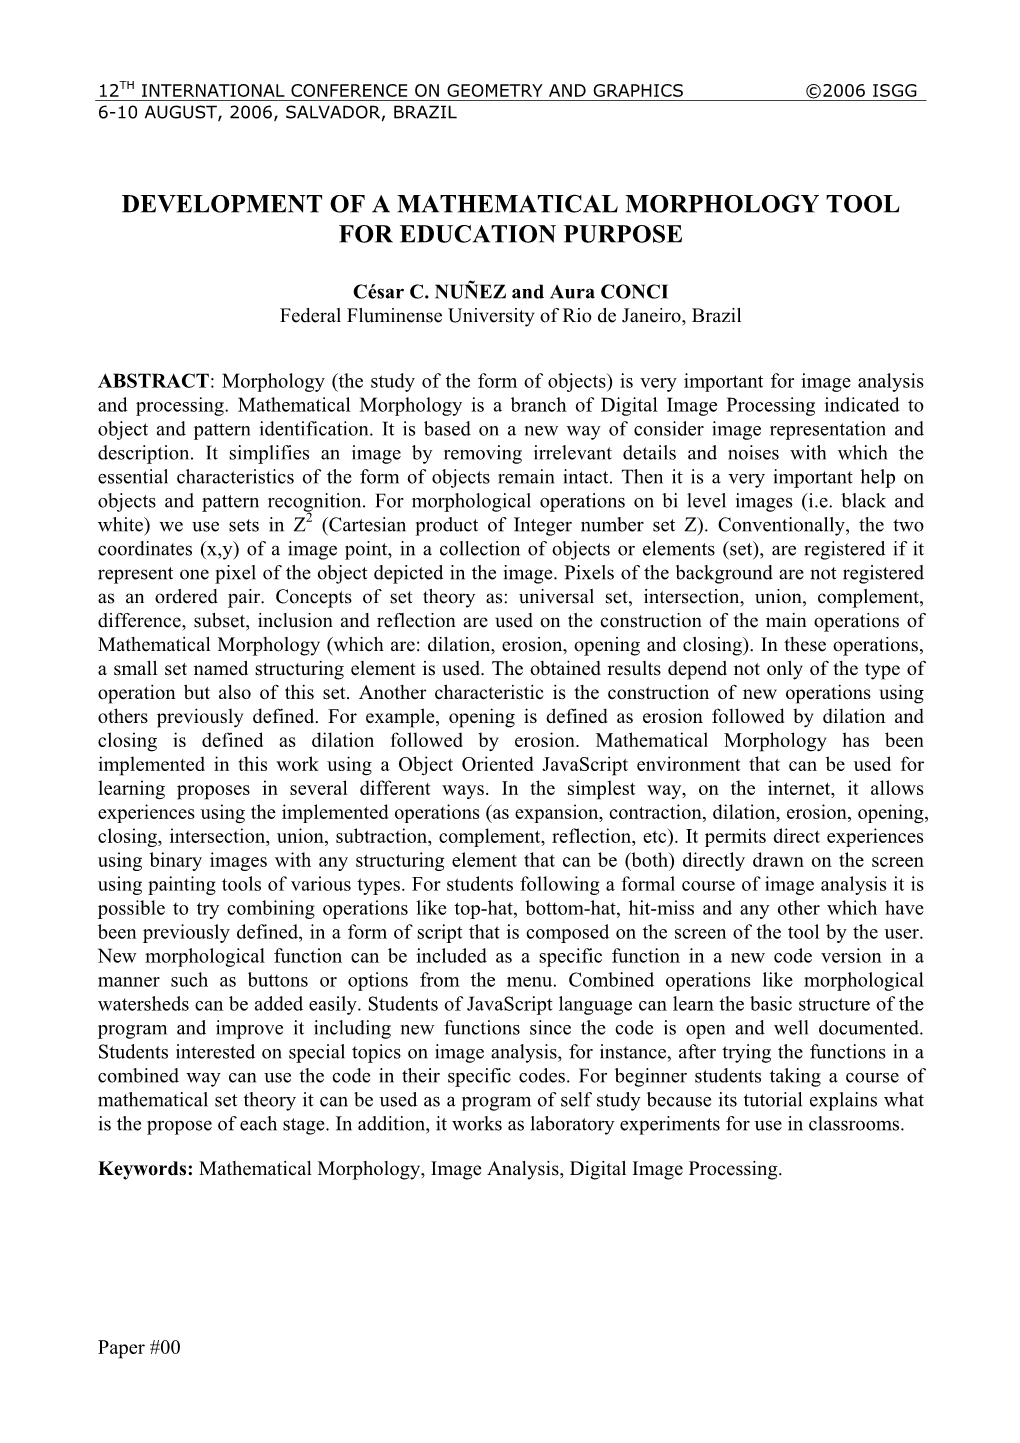 Development of a Mathematical Morphology Tool for Education Purpose